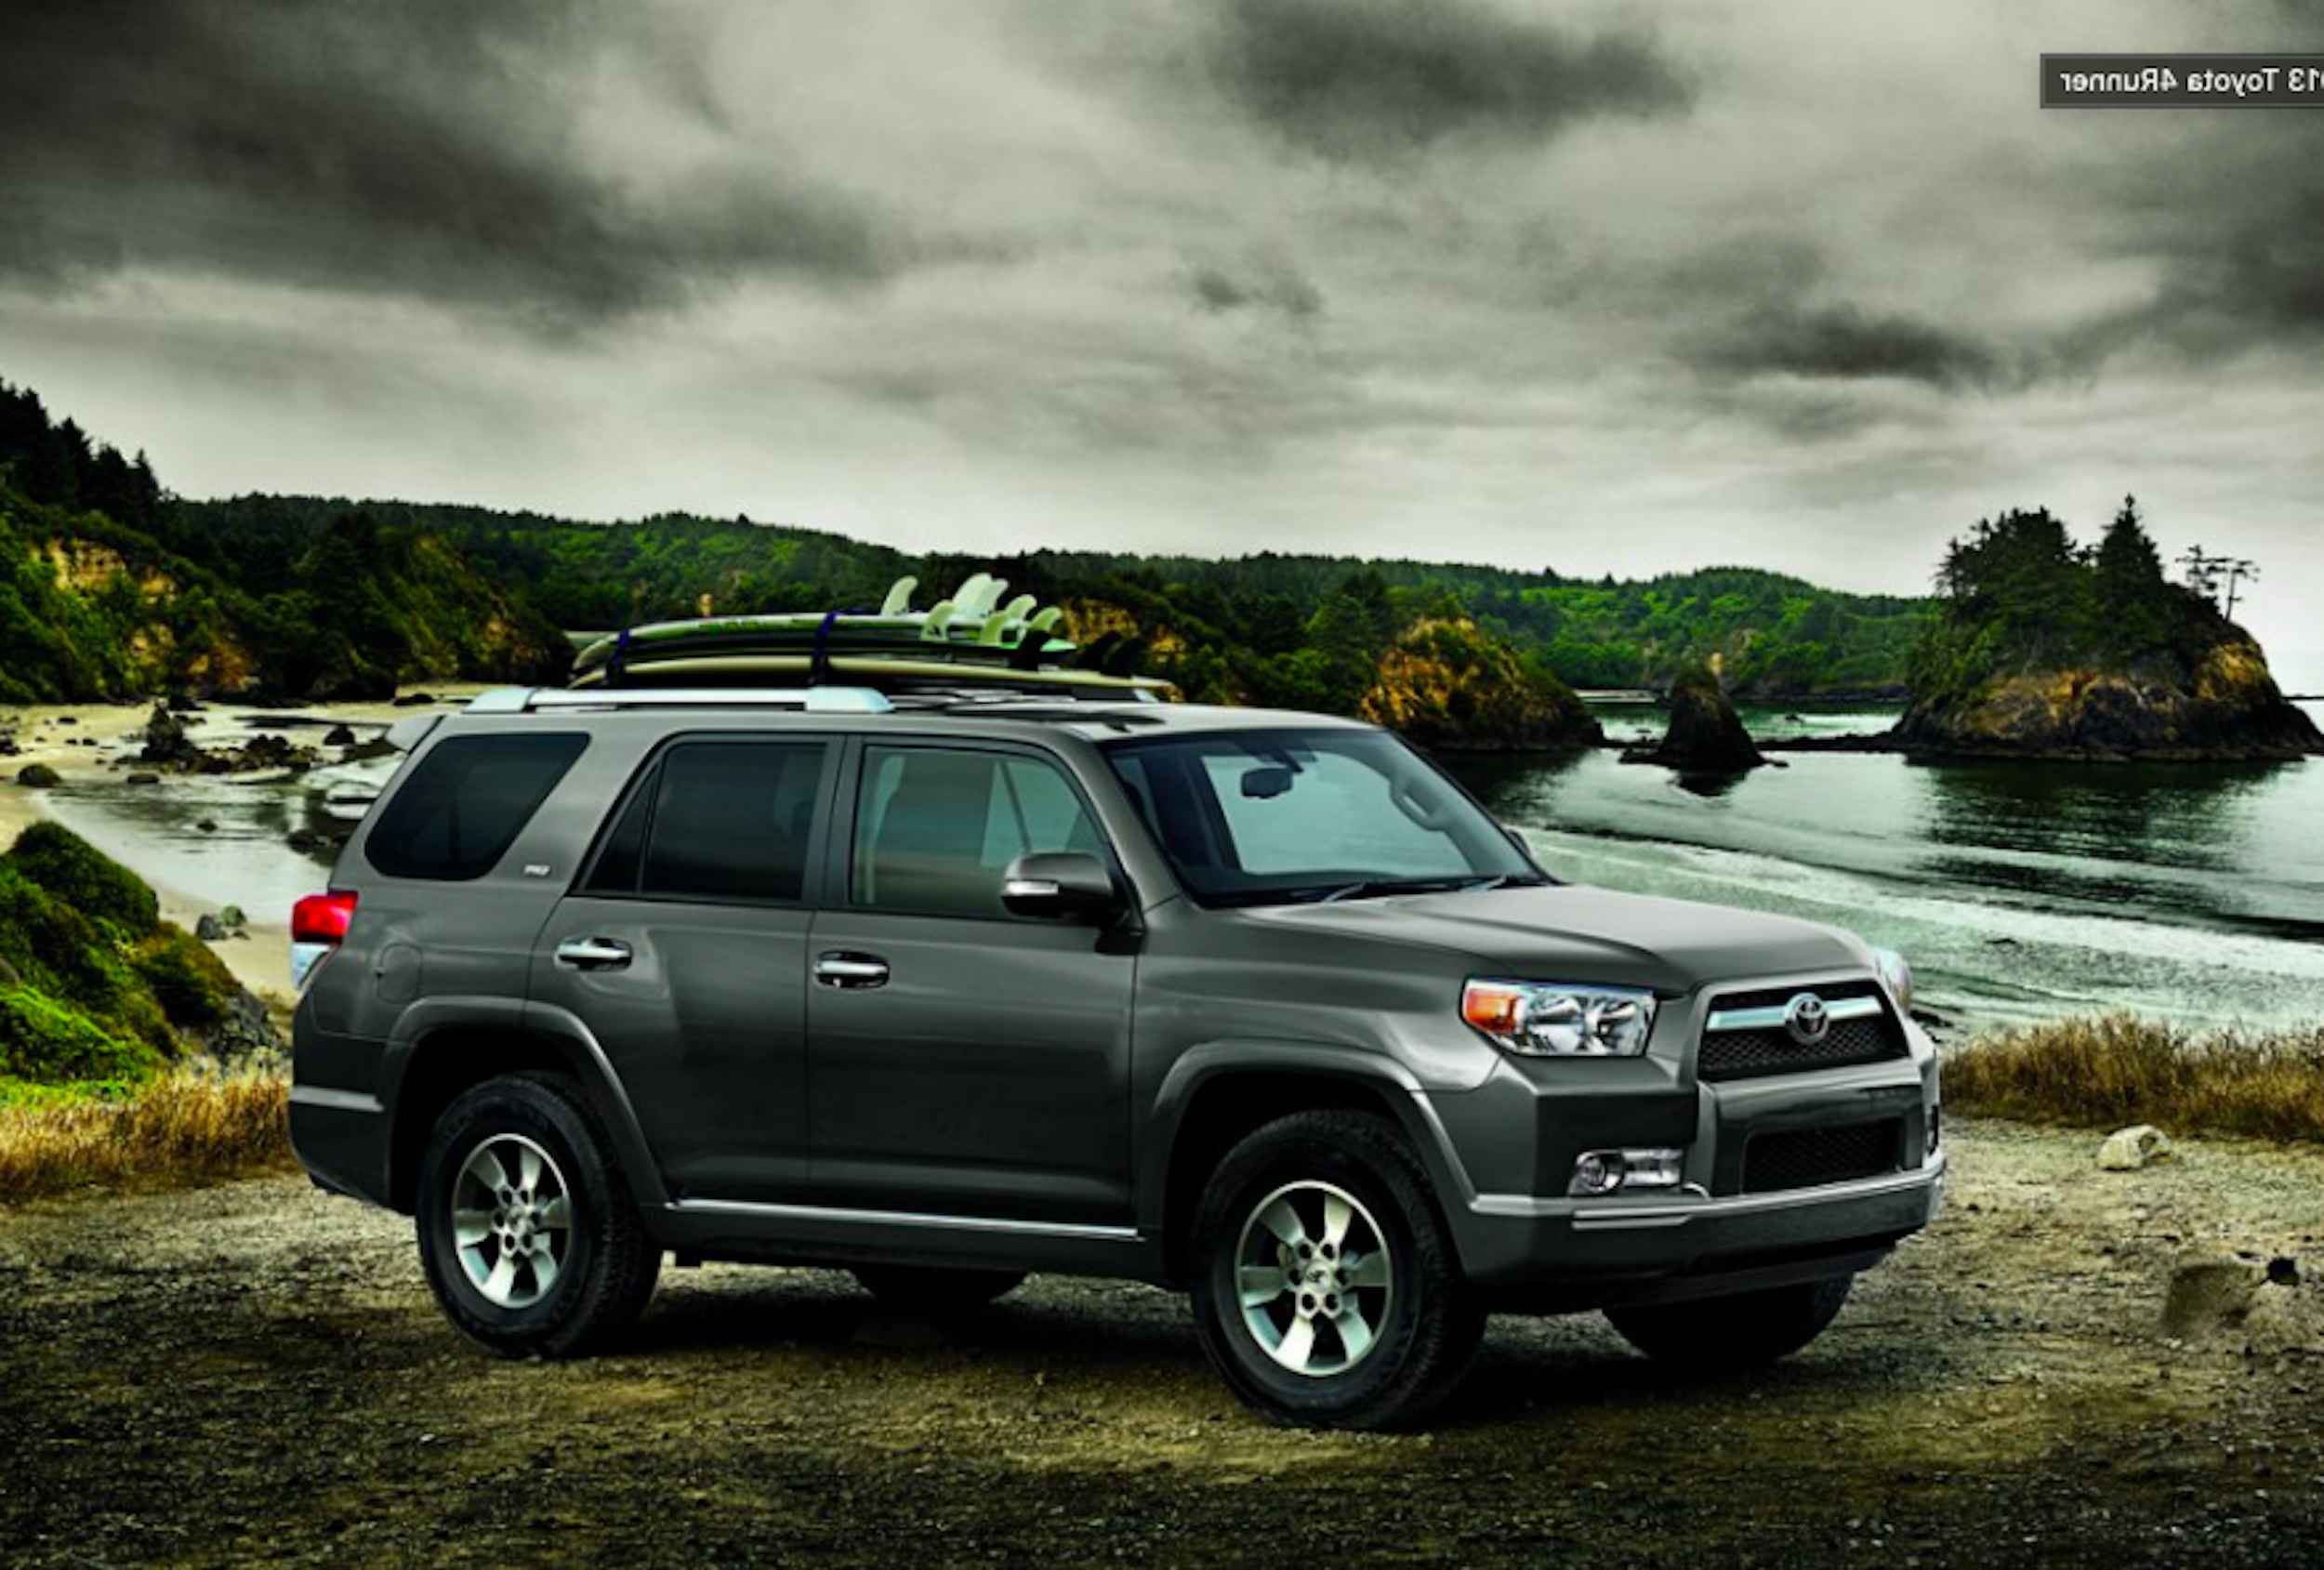 2013 Toyota 4Runner outside with surfboards on top